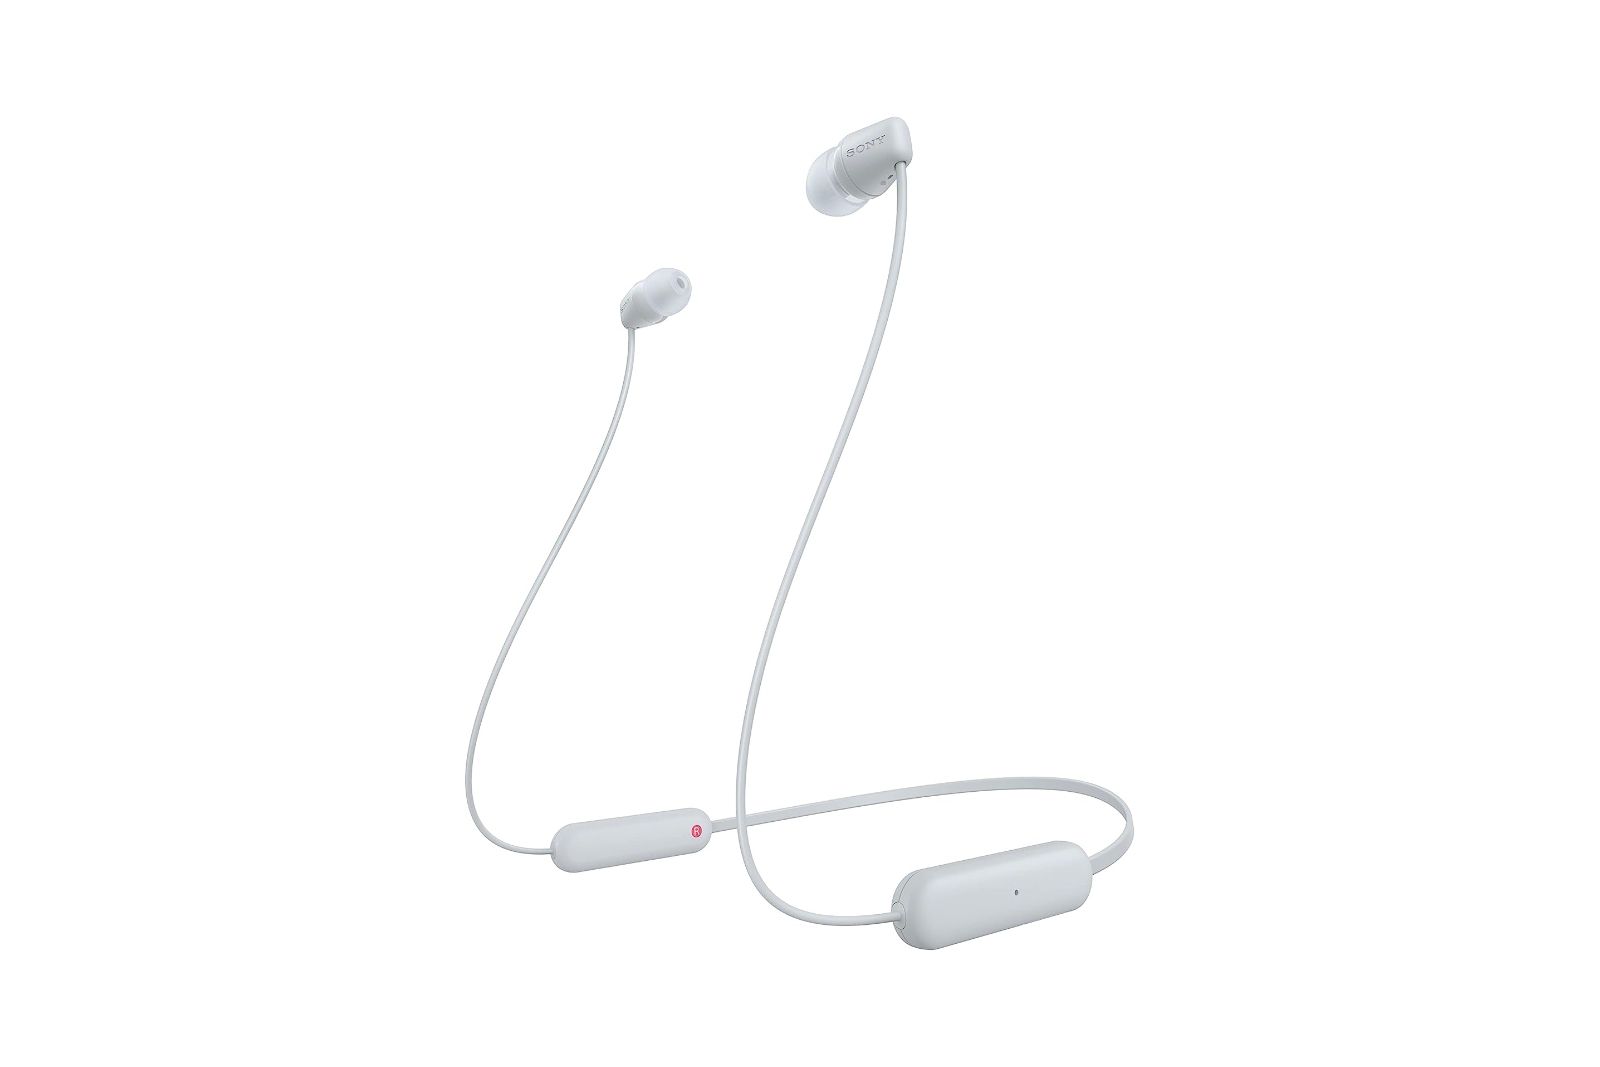 White, Sony-branded earbuds with battery capsules on either side and rubber ear tips.